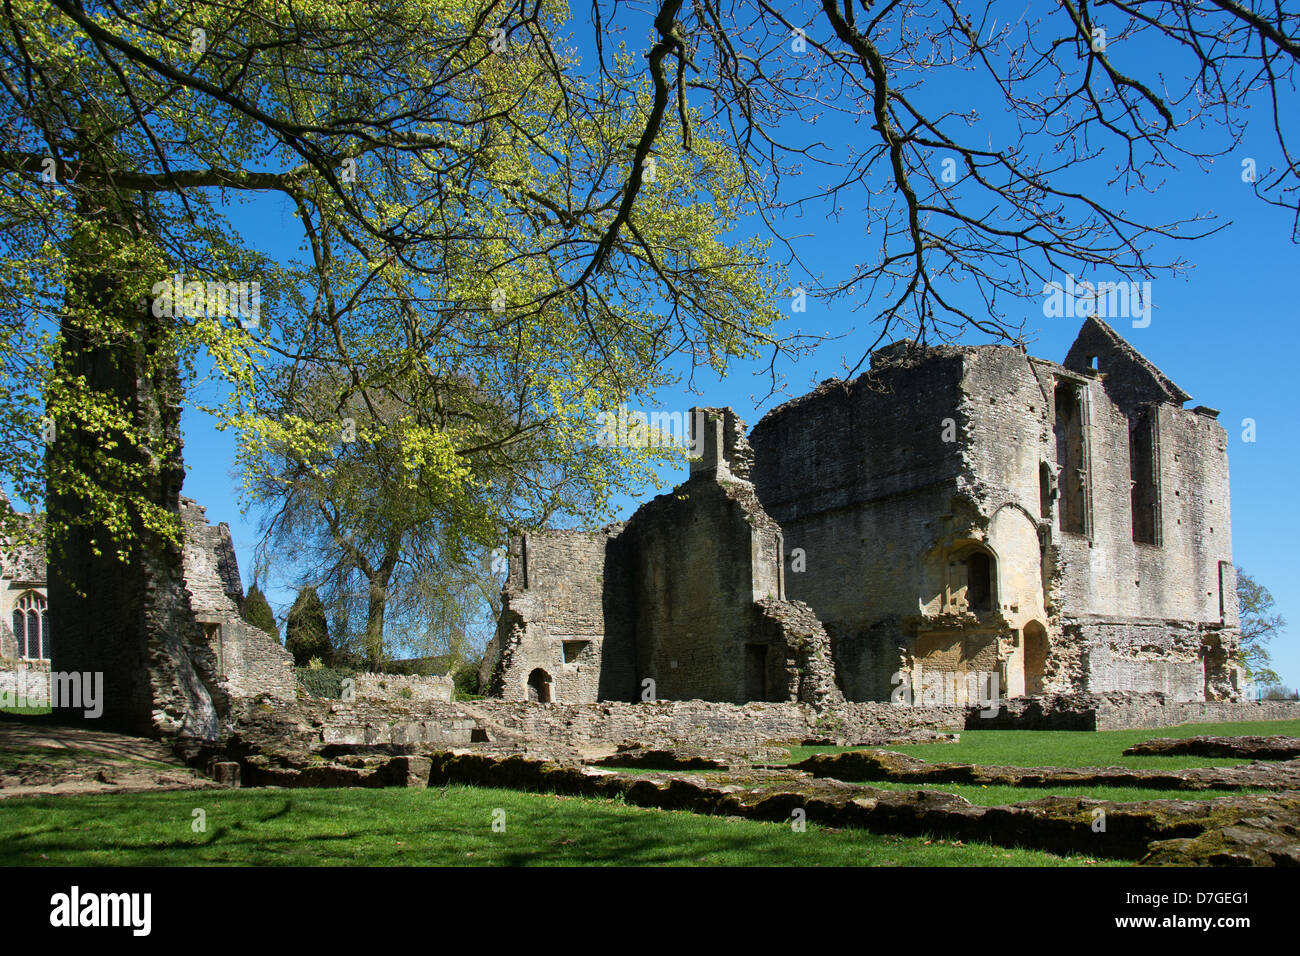 OXFORDSHIRE, UK. The ruins of Minster Lovell Hall near Witney. 2013. Stock Photo